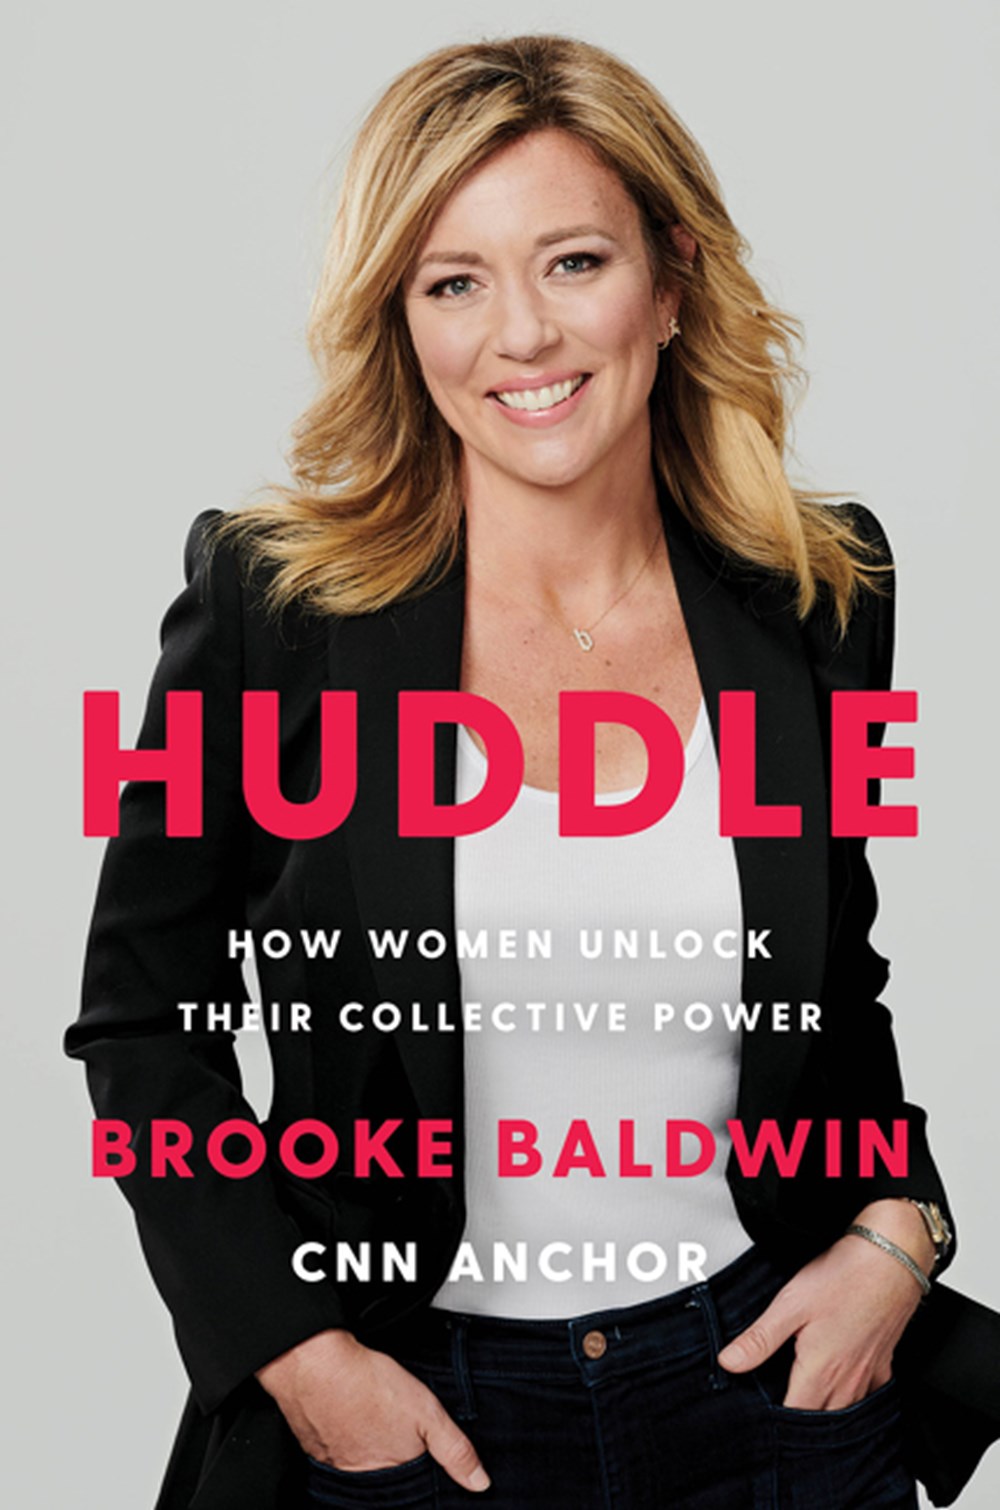 Huddle How Women Unlock Their Collective Power